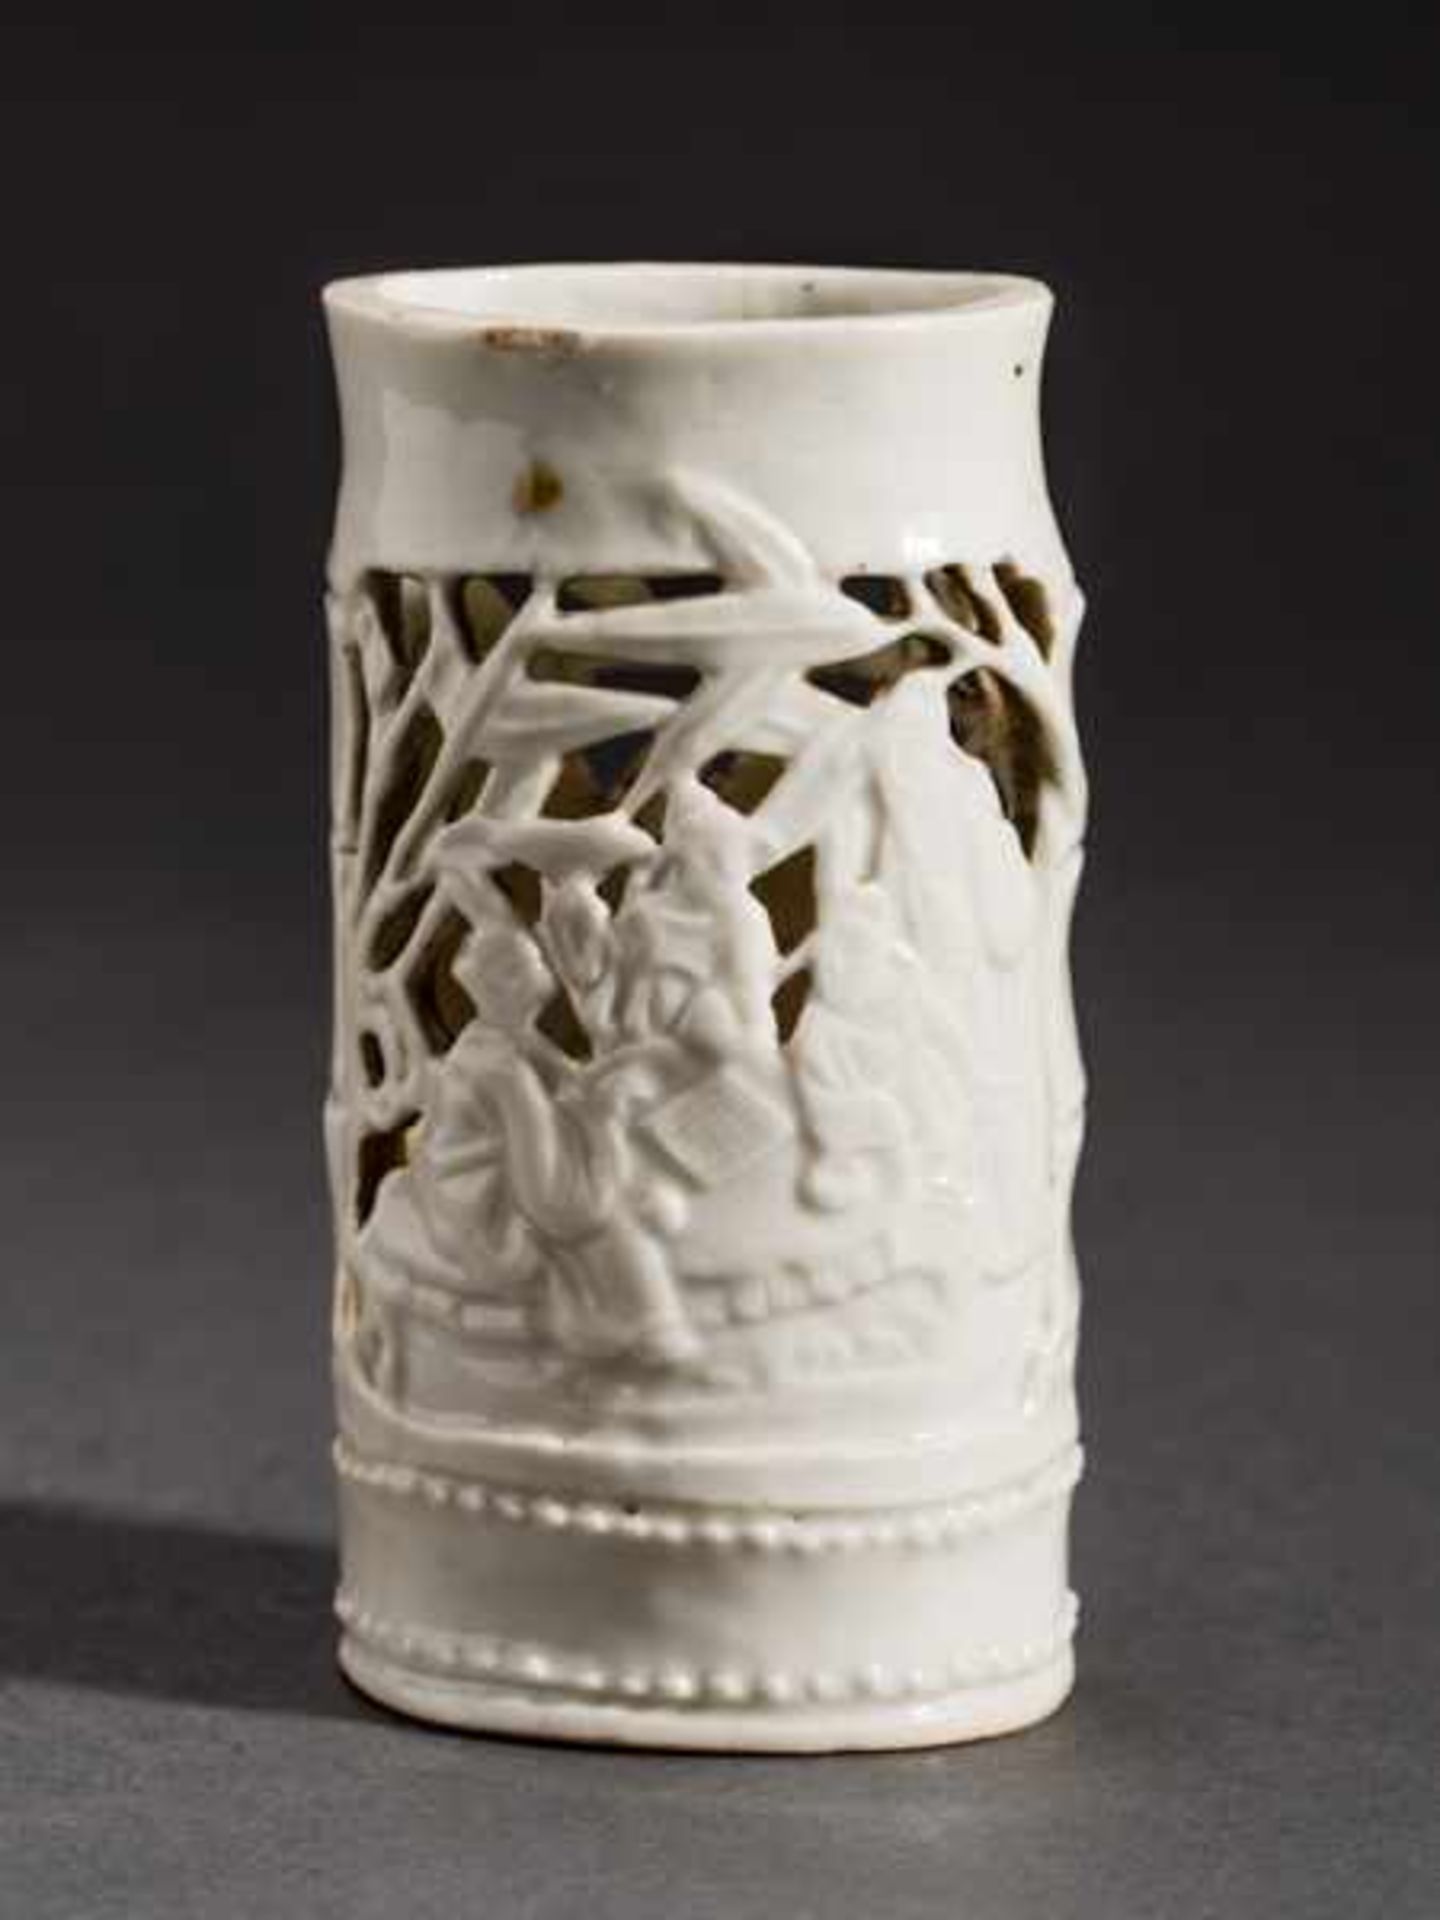 THE SEVEN WISE MEN IN A BAMBOO GROVE Blanc de Chine-Porcelain. China, Qing, 19th cent.A cup for